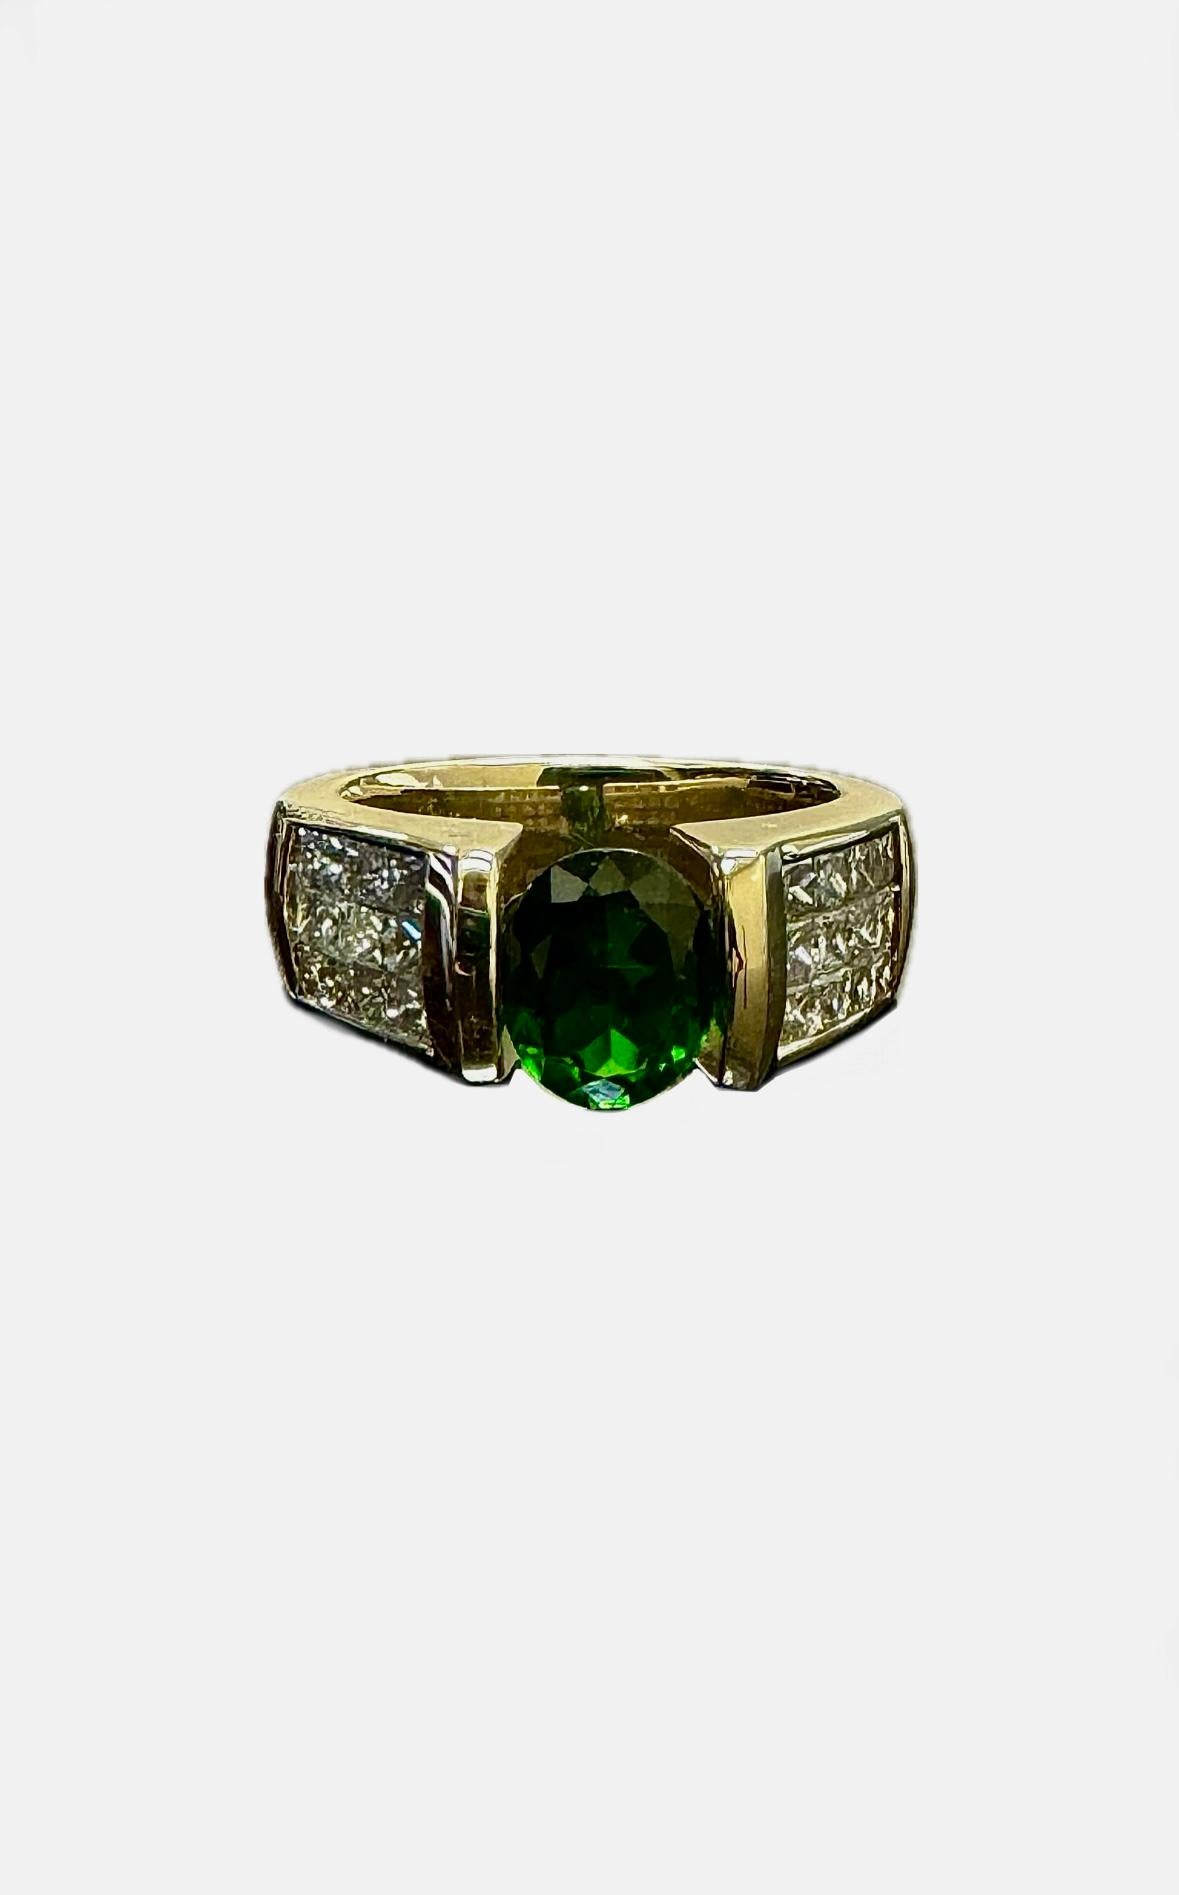 DeKara Designs Collection

Modern Oval Tsavorite Garnet Princess Cut Invisible Diamond Engagement Ring. Very modern, sparkly, and gold with a beautiful yellow gold engagement ring.

Metal-14K Yellow Gold, .583

Stones- Genuine Oval Tsavorite Garnet